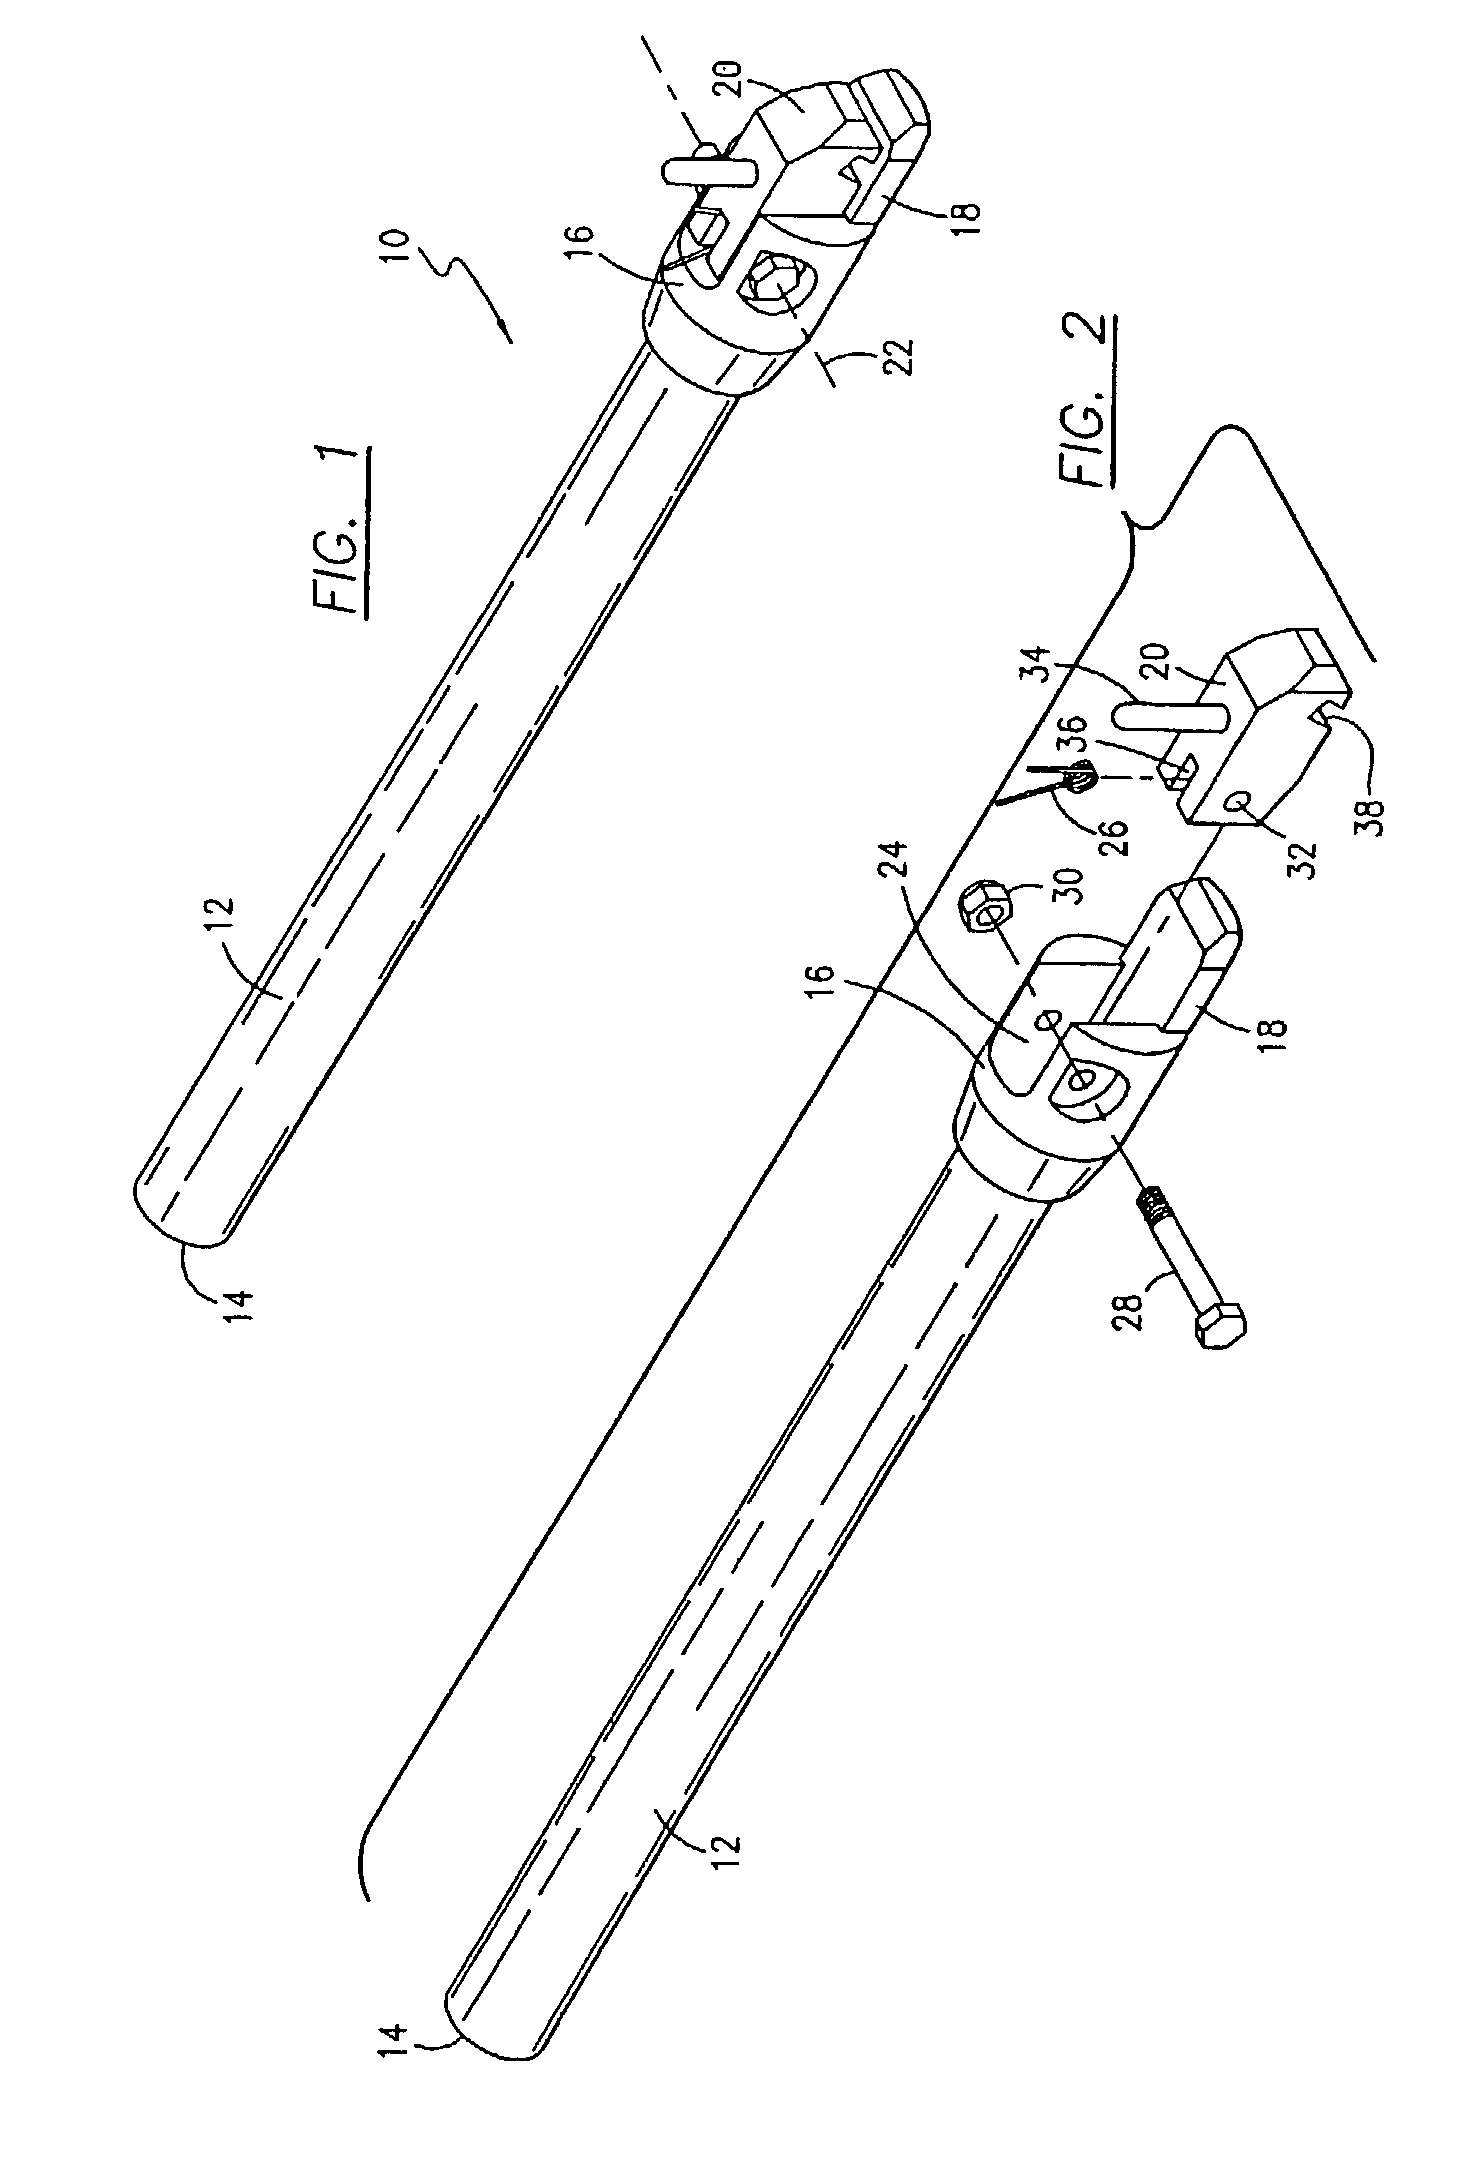 Automatic outrigger lock